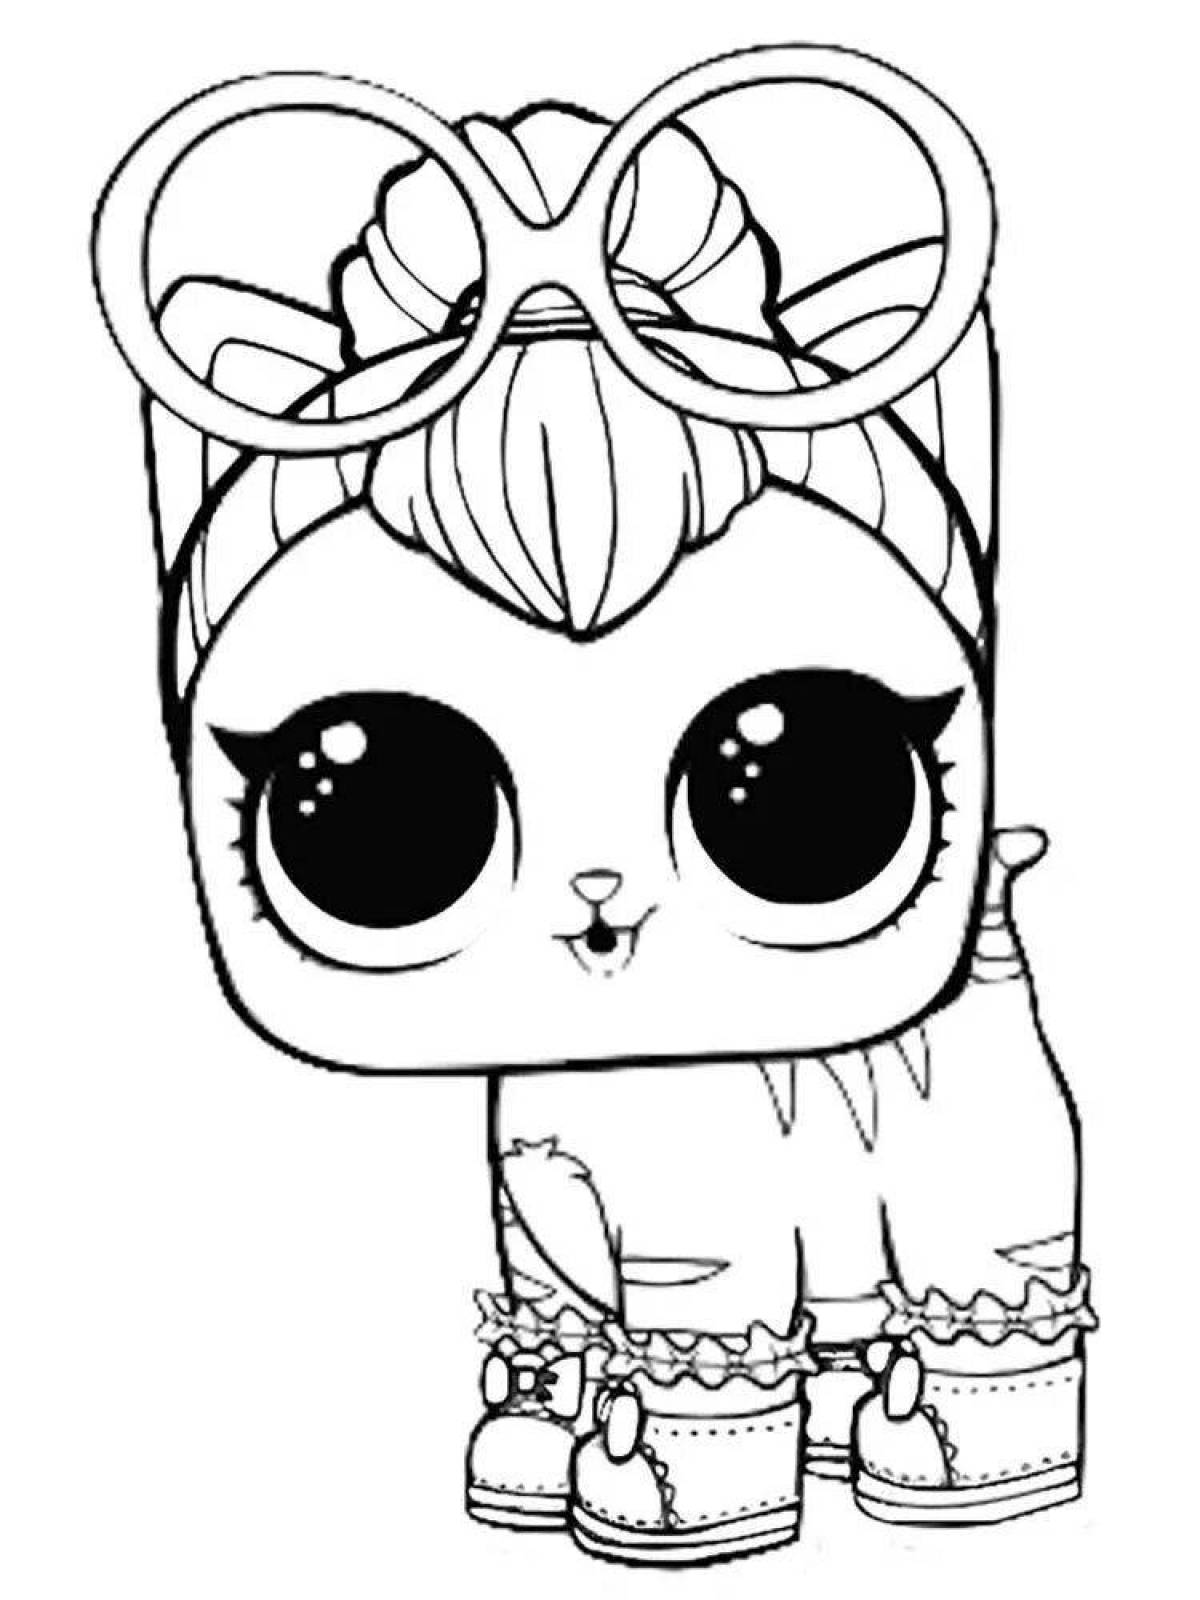 Fancy coloring doll lol animals